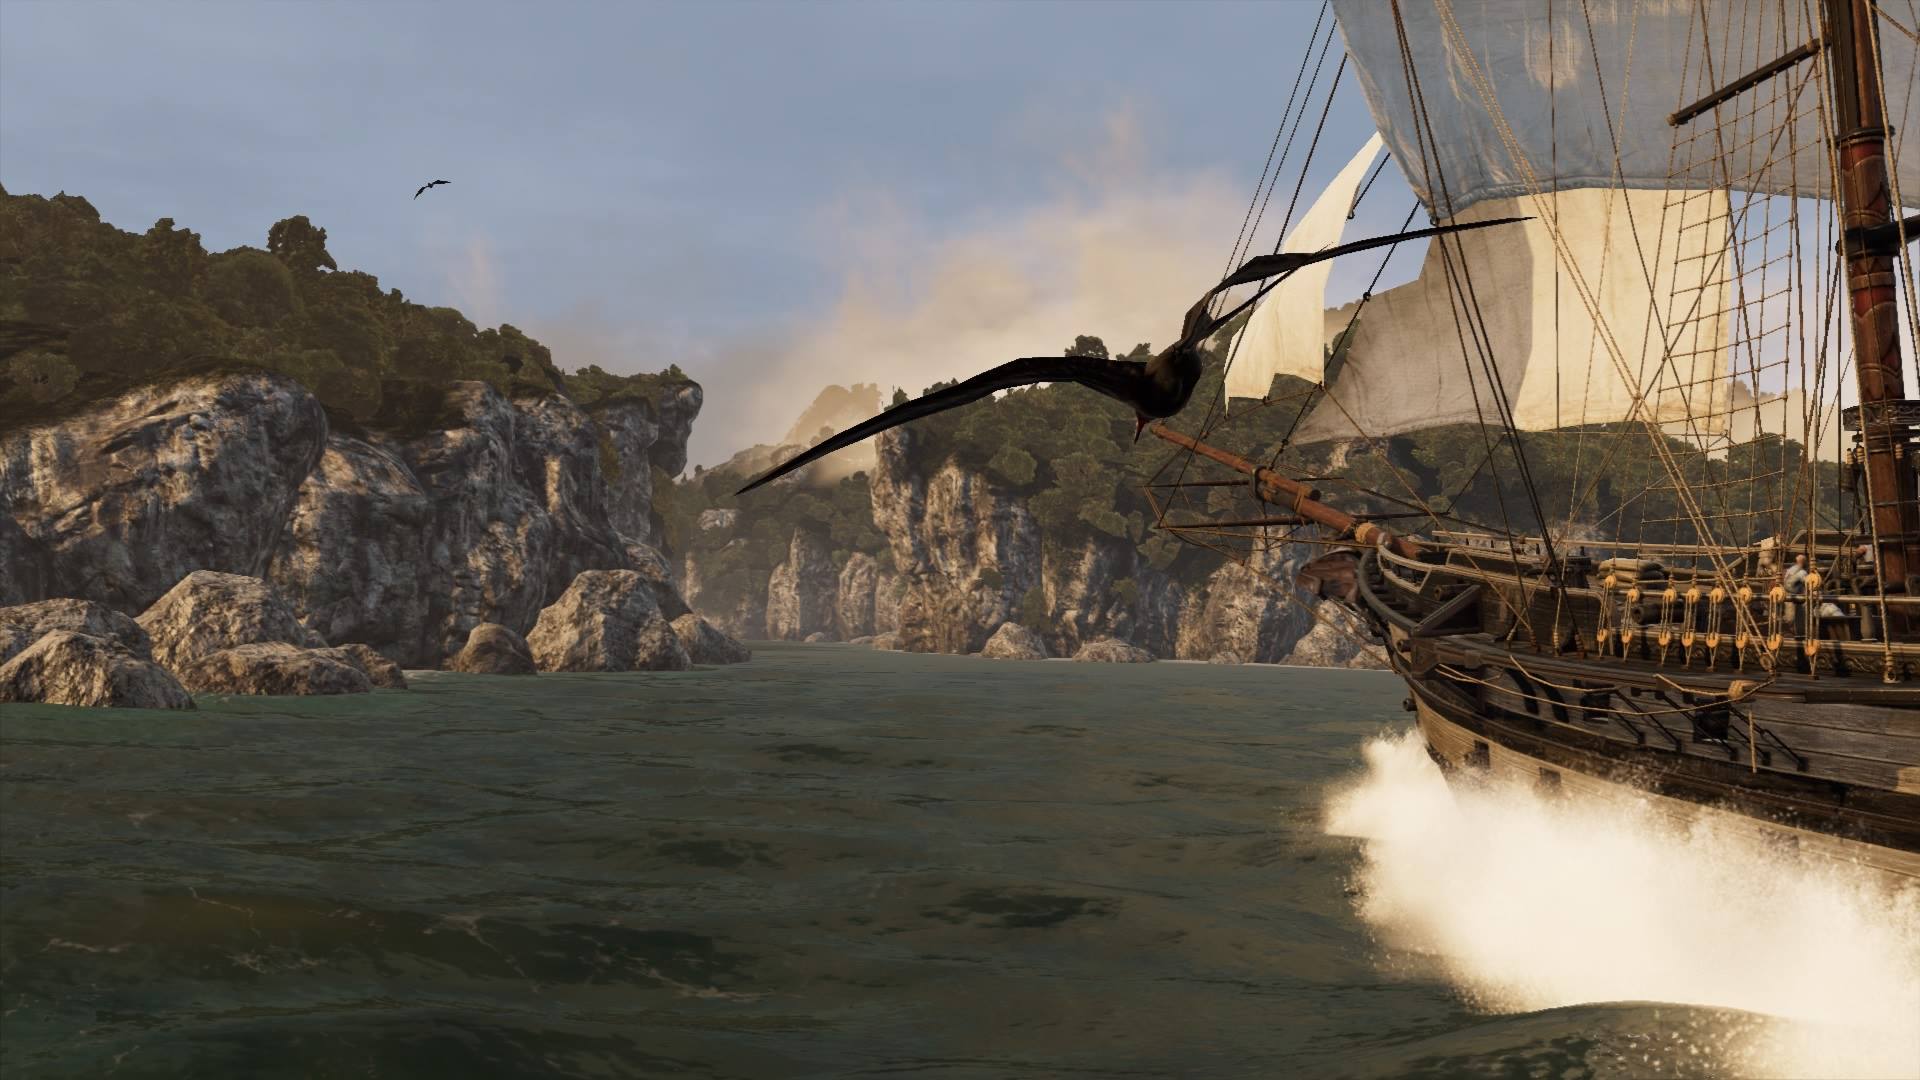 Naval combat was introduced in Assassin's Creed III.